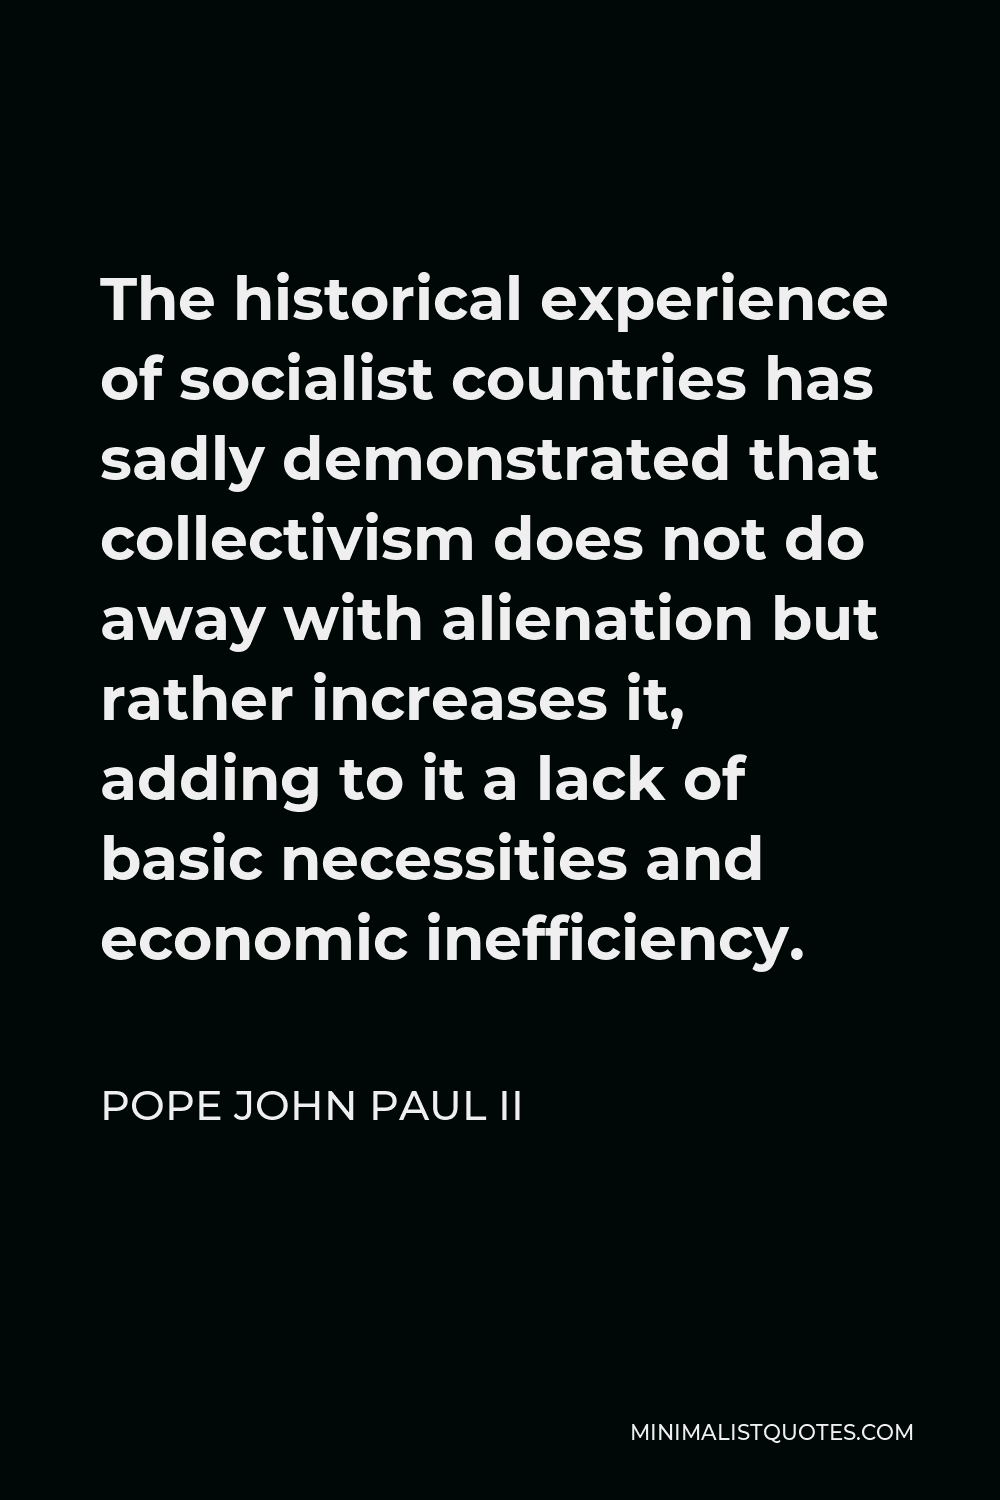 Pope John Paul II Quote - The historical experience of socialist countries has sadly demonstrated that collectivism does not do away with alienation but rather increases it, adding to it a lack of basic necessities and economic inefficiency.